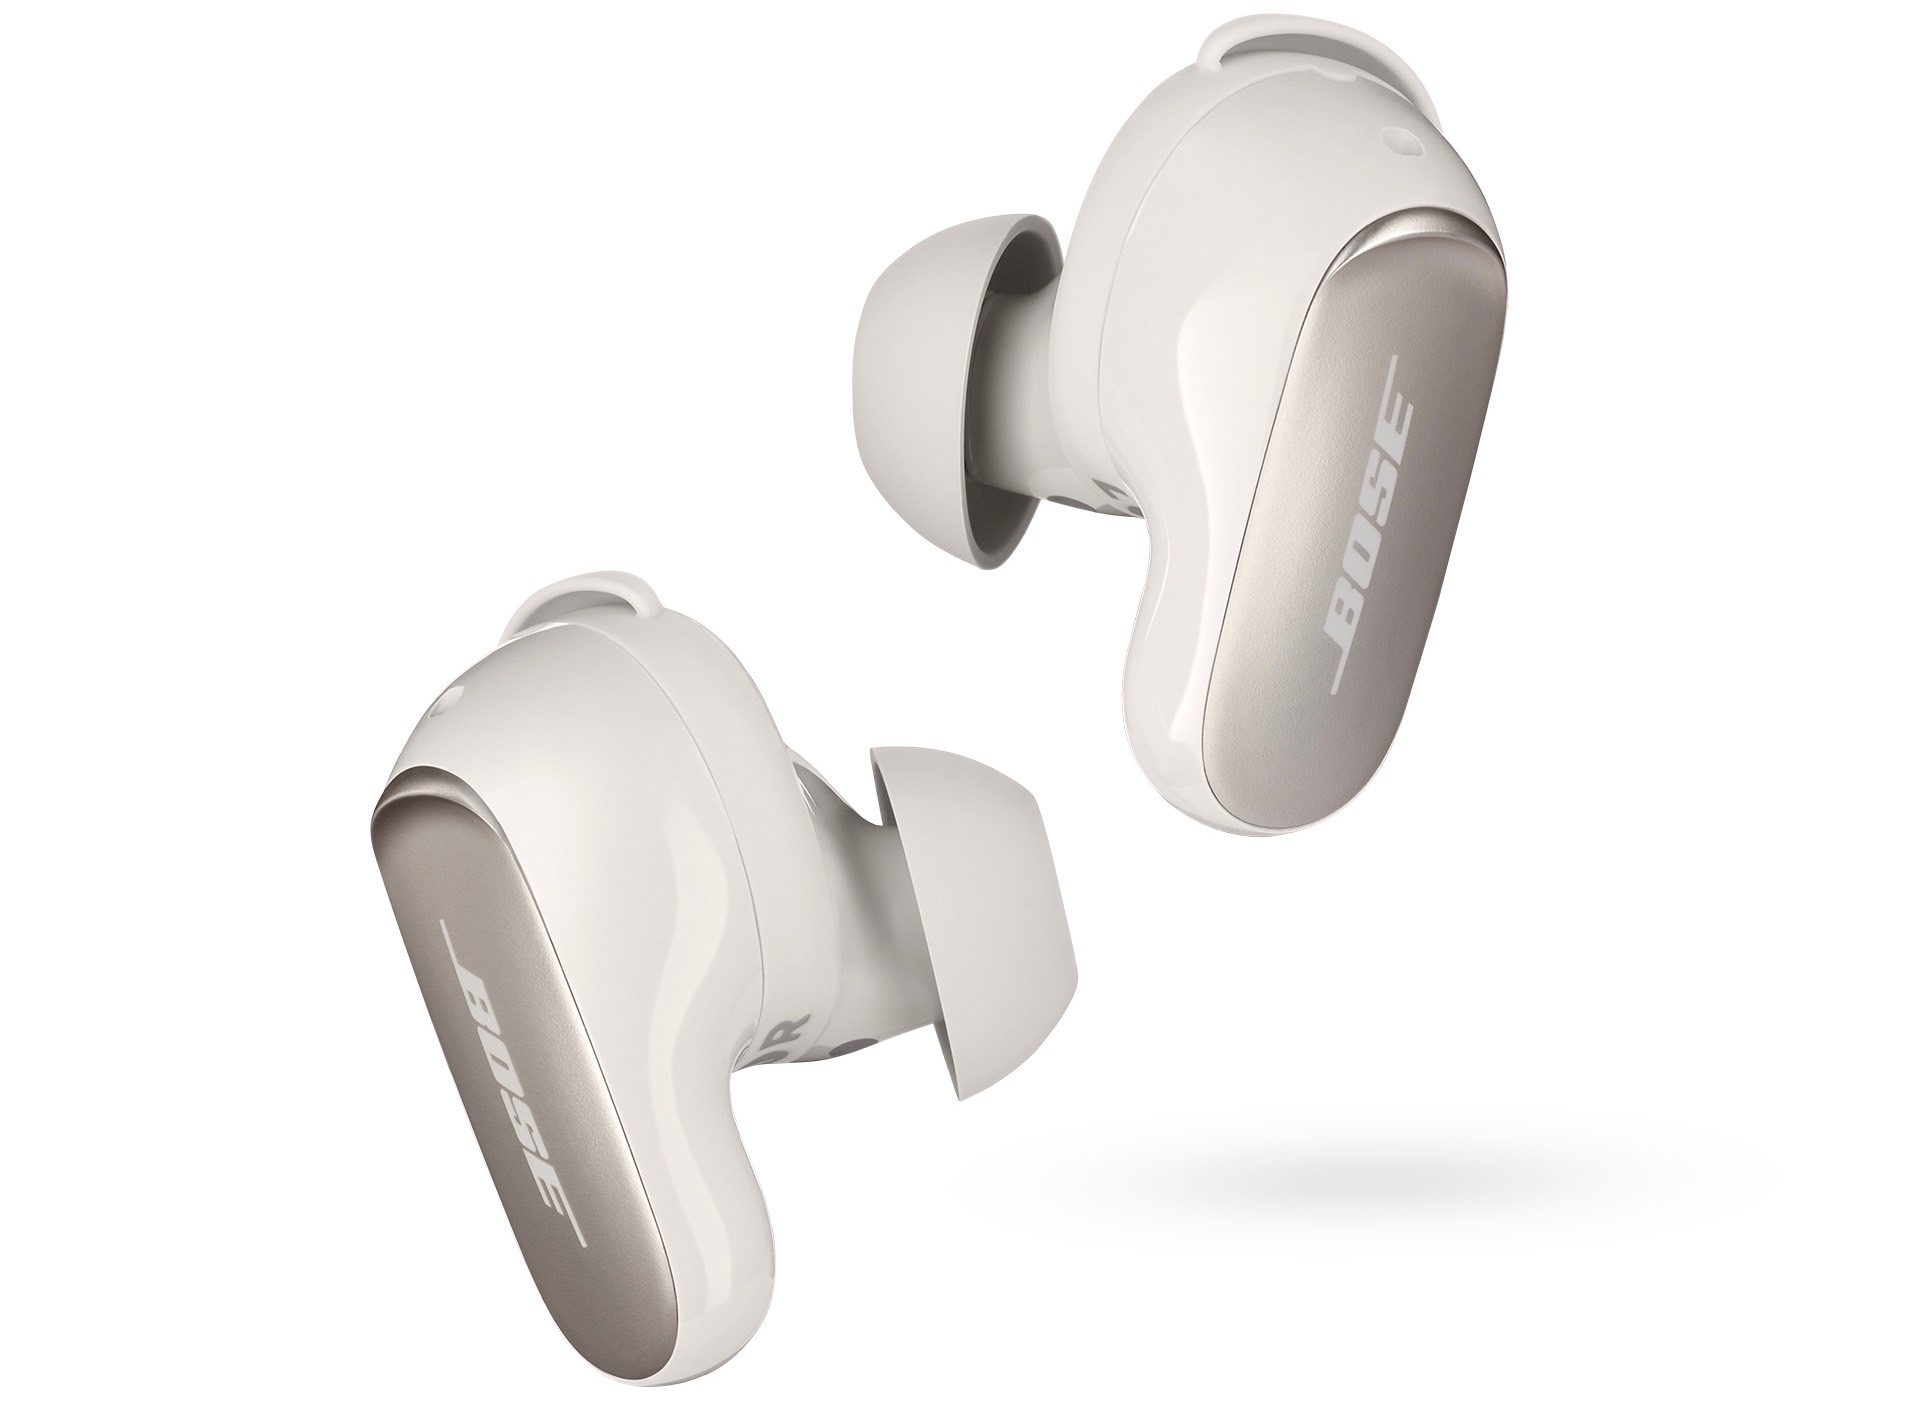 Bose QuietComfort Ultra Earbuds in white.